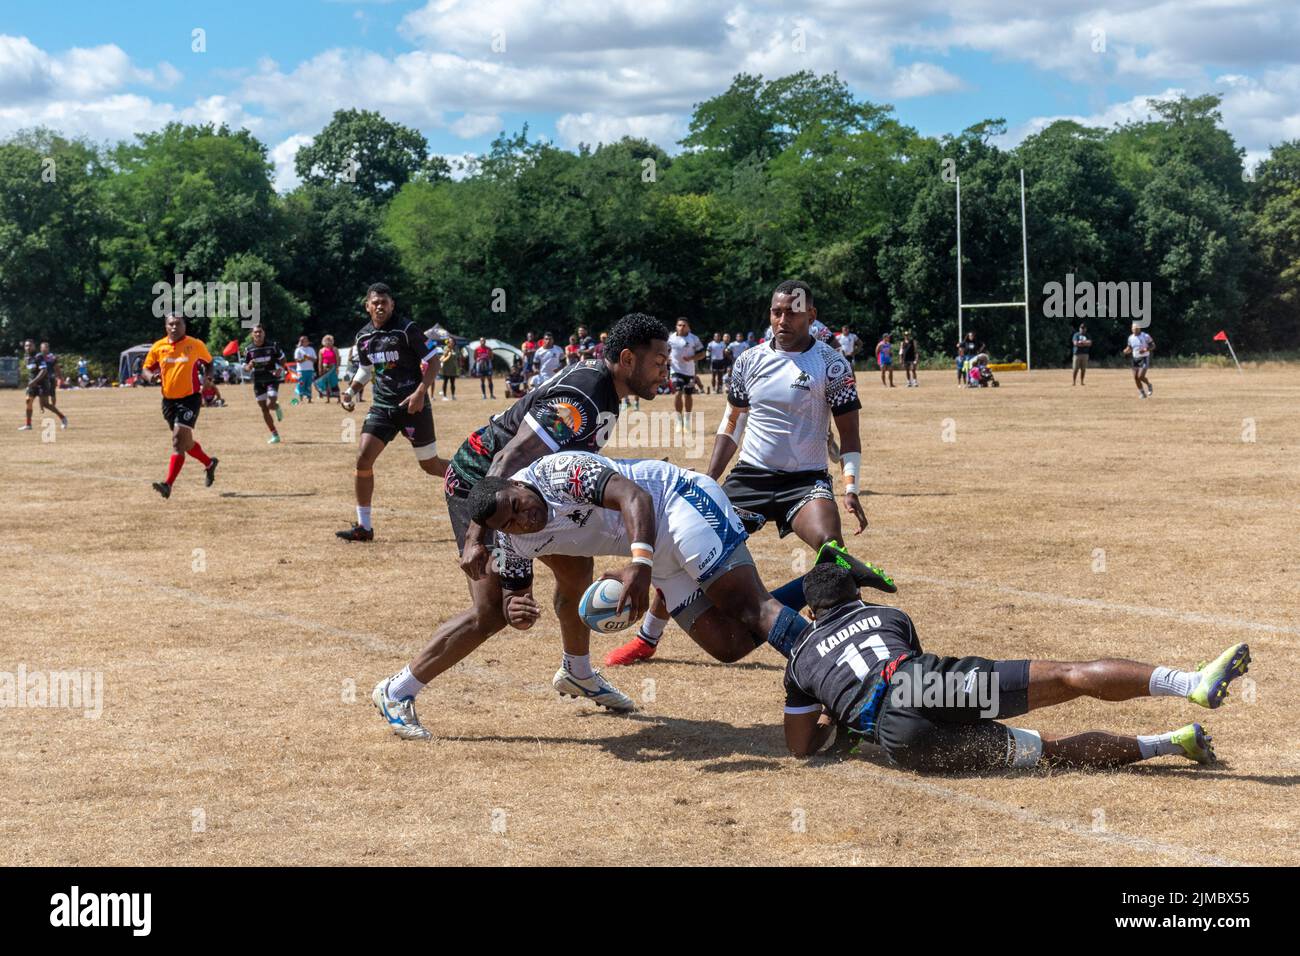 Rugby Sevens at Bula Festival in Aldershot, Hampshire, England, UK, 5th August 2022. A celebration of Fijian culture, especially in the British army. Stock Photo